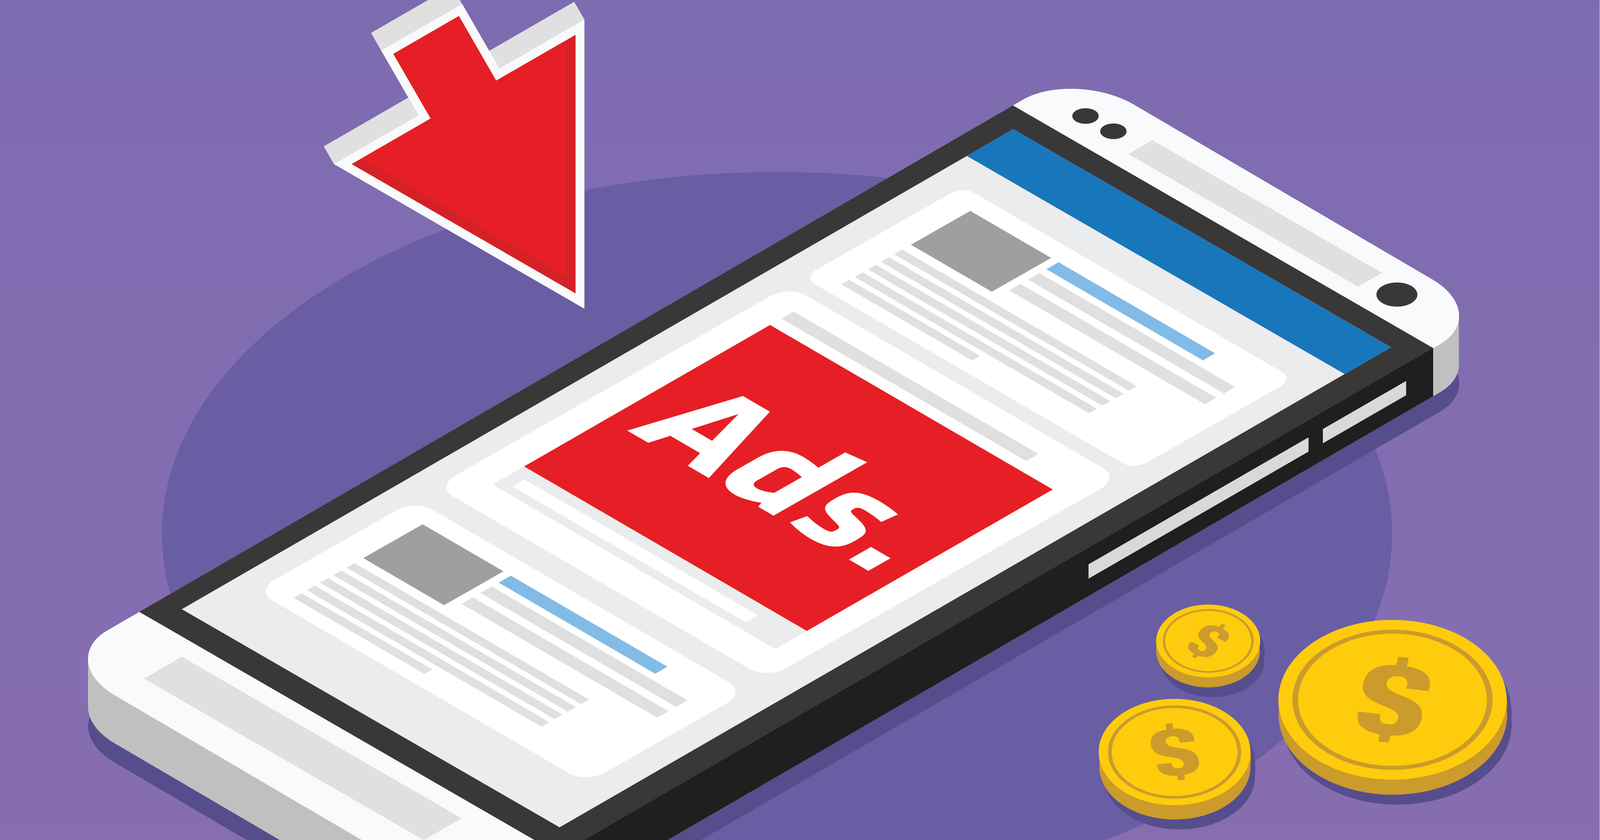 Are Social Media Ads Effective